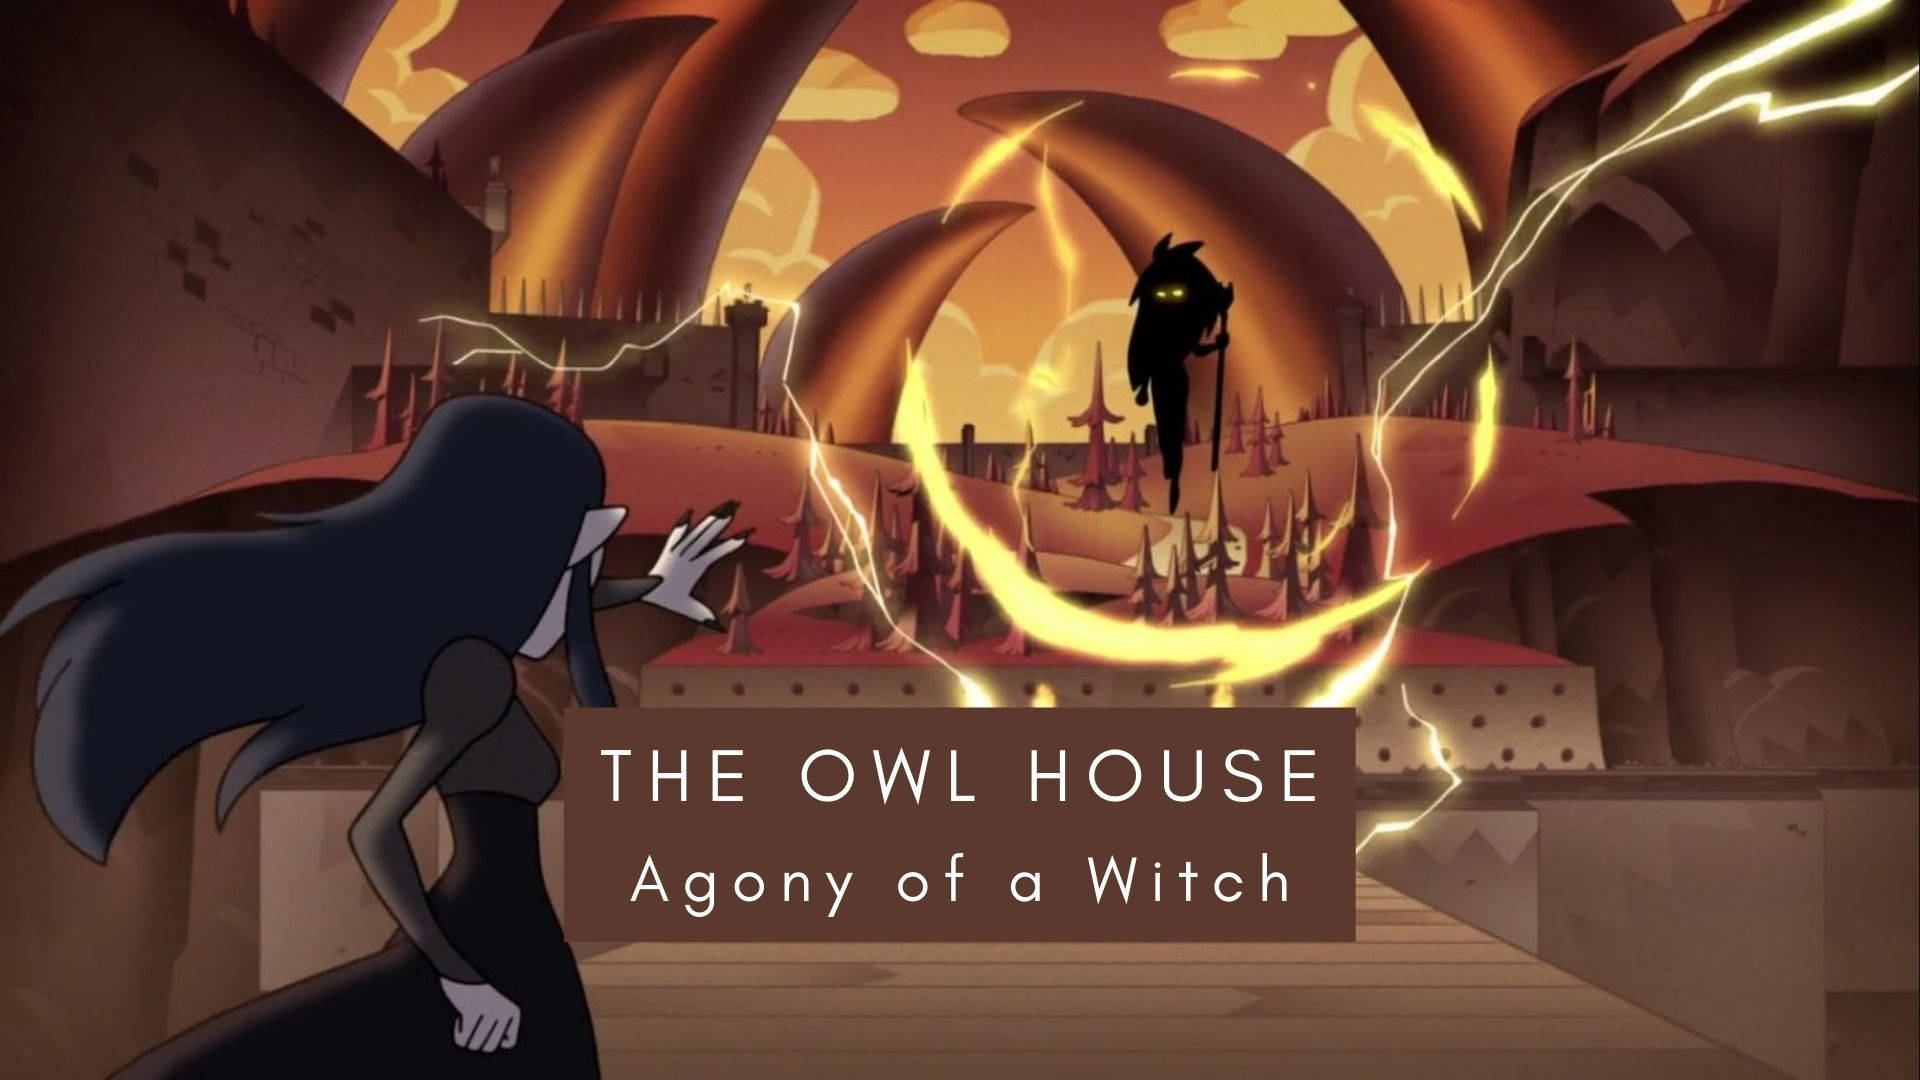 Eda And Luz Locked In Battle During The Agony Of A Witch Episode In The Owl House